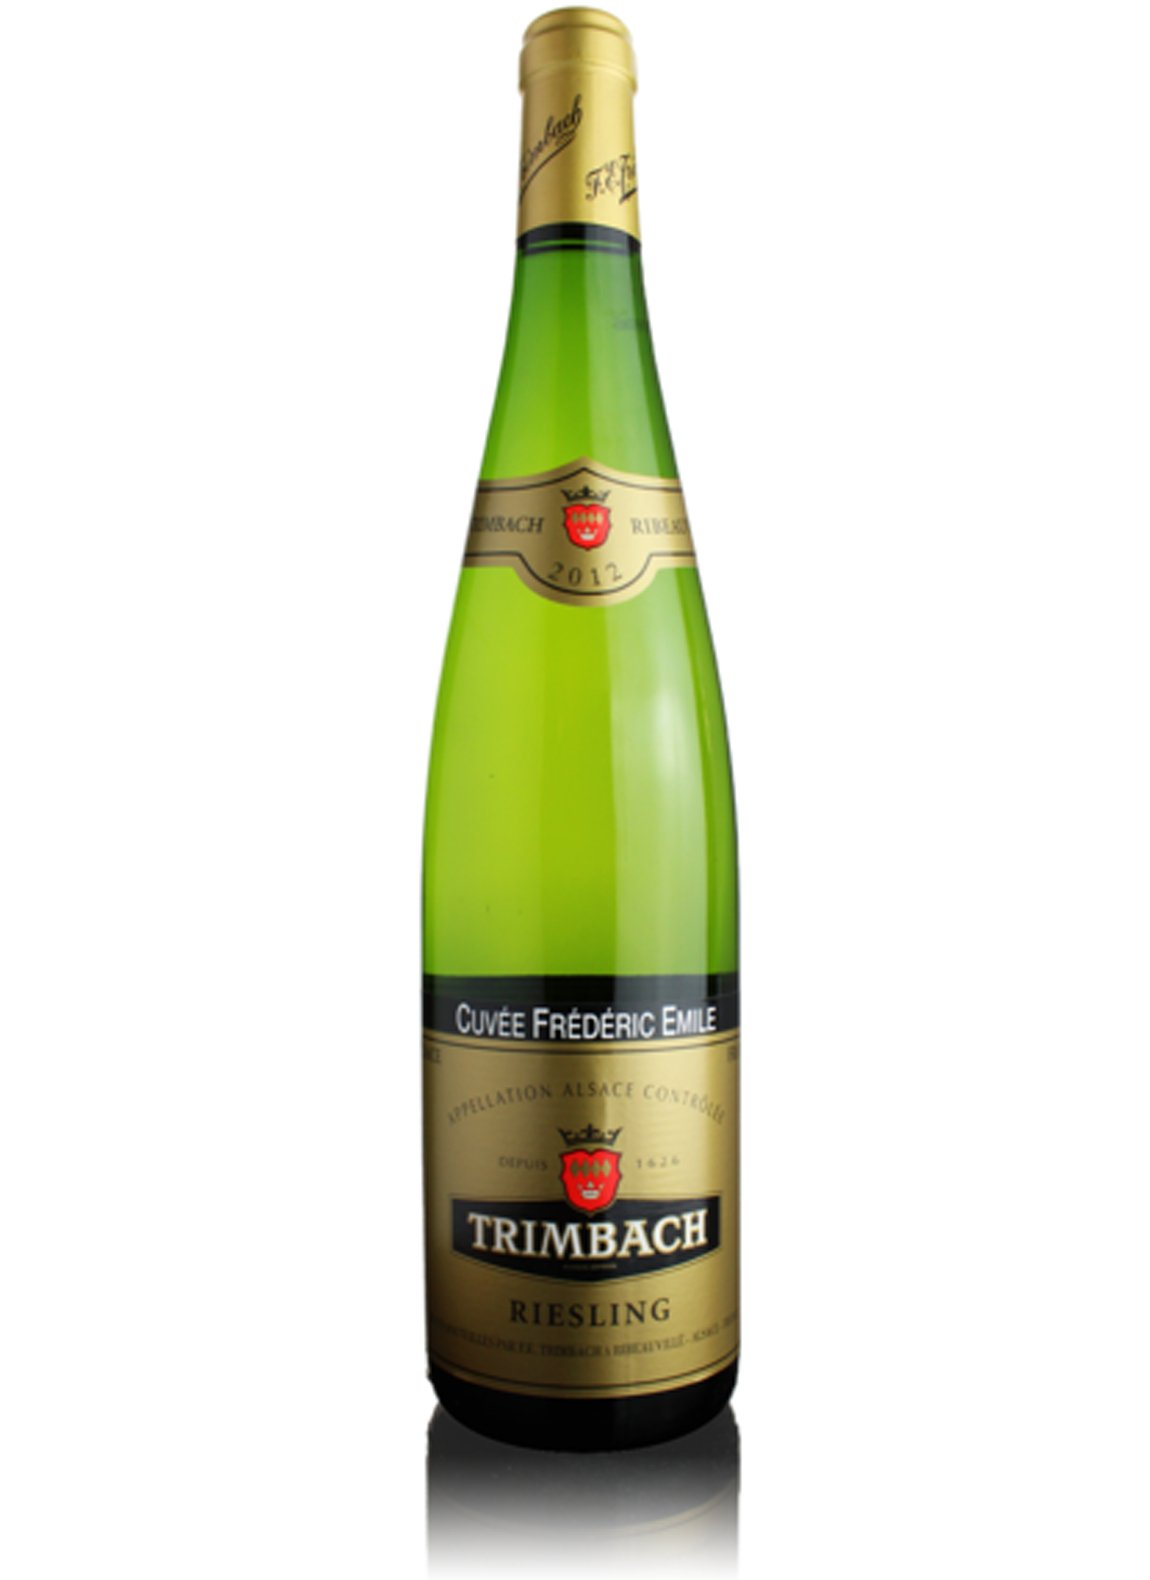 Trimbach Riesling Cuvee Frederic Emile 2014 - Wine France White - Liquor Wine Cave